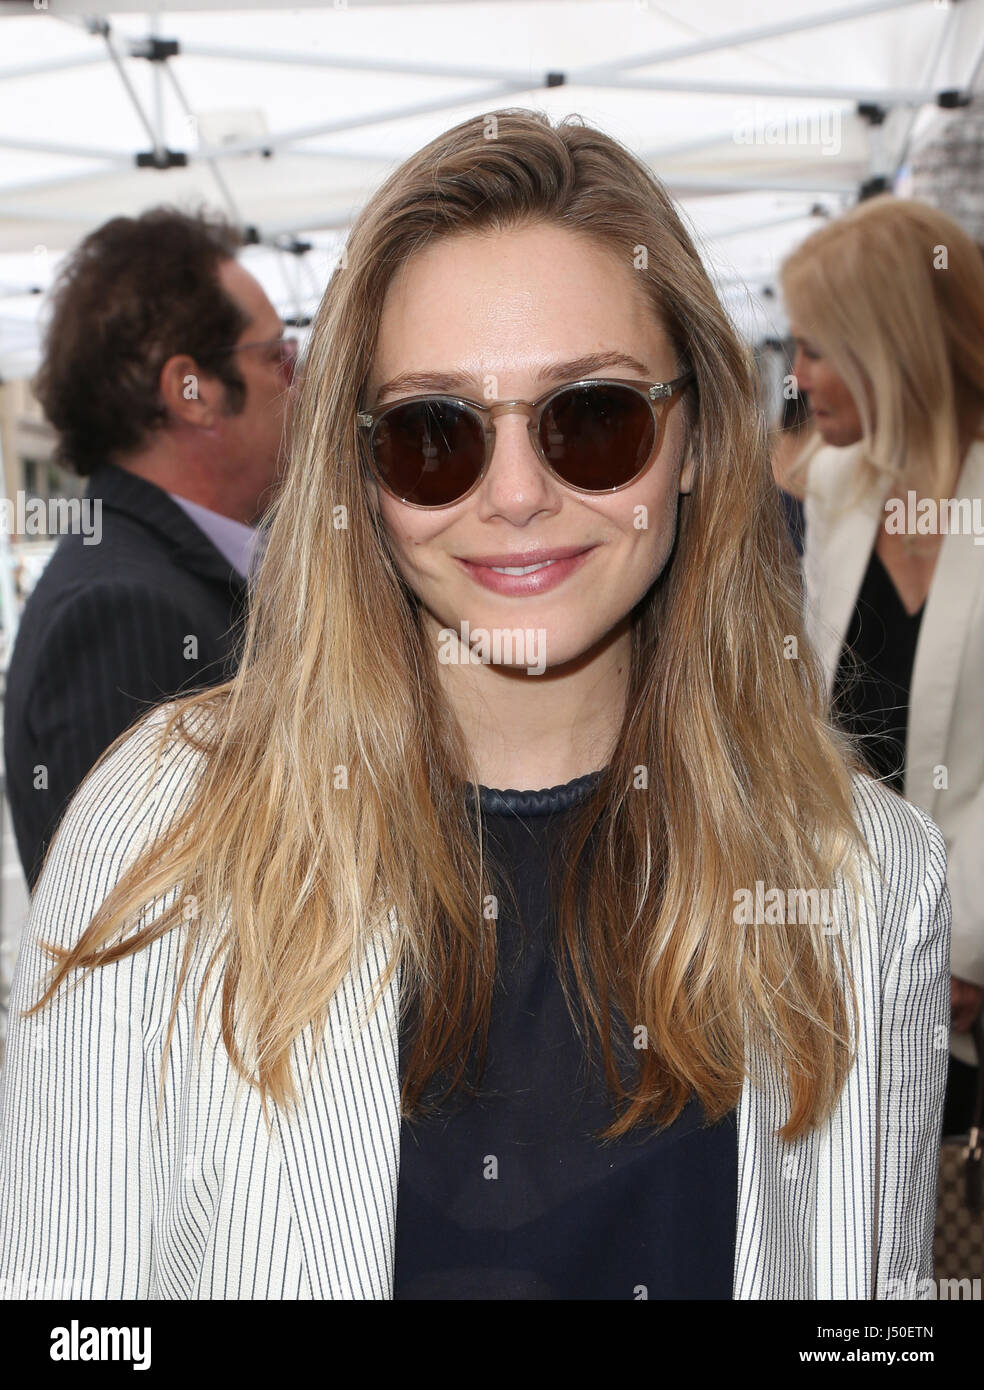 Hollywood, Ca. 15th May, 2017. Elizabeth Olsen, At Ken Corday Honored With Star On The Hollywood Walk Of Fame At On The Hollywood Walk Of Fame In California on May 15, 2017. Credit: Fs/Media Punch/Alamy Live News Stock Photo